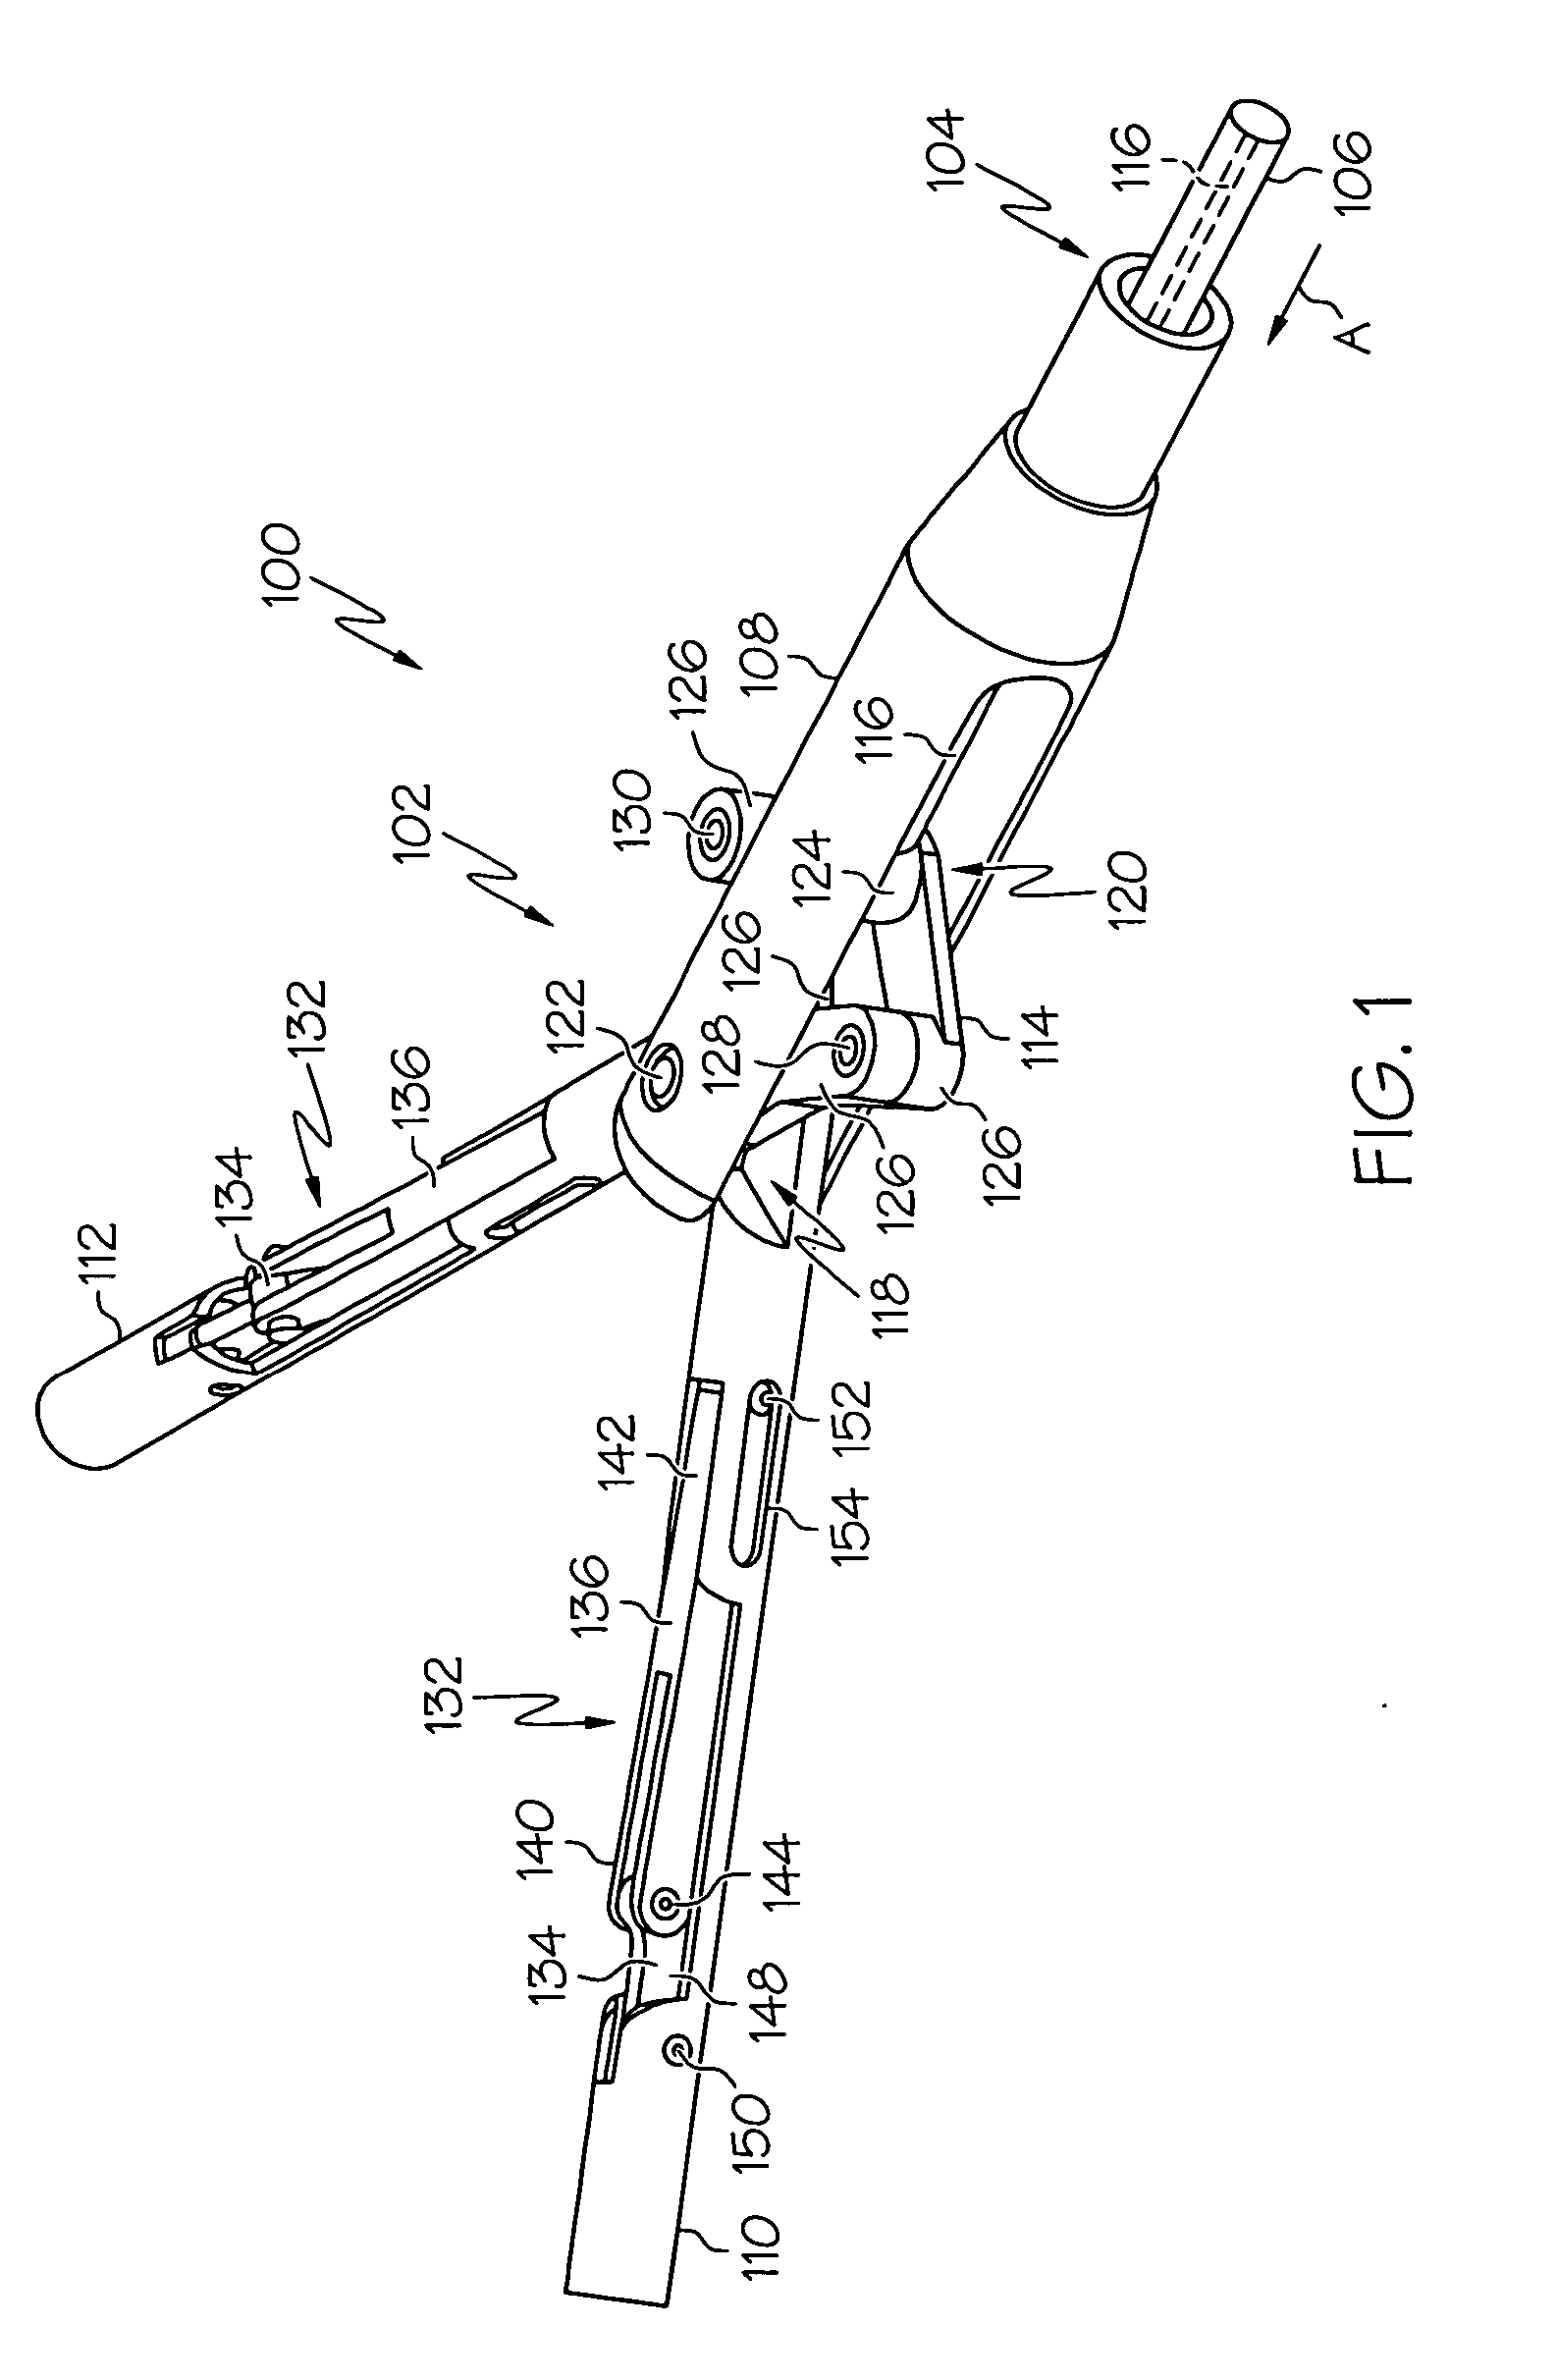 Apparatus and method for deploying a cutting element during an endoscopic mucosal resection